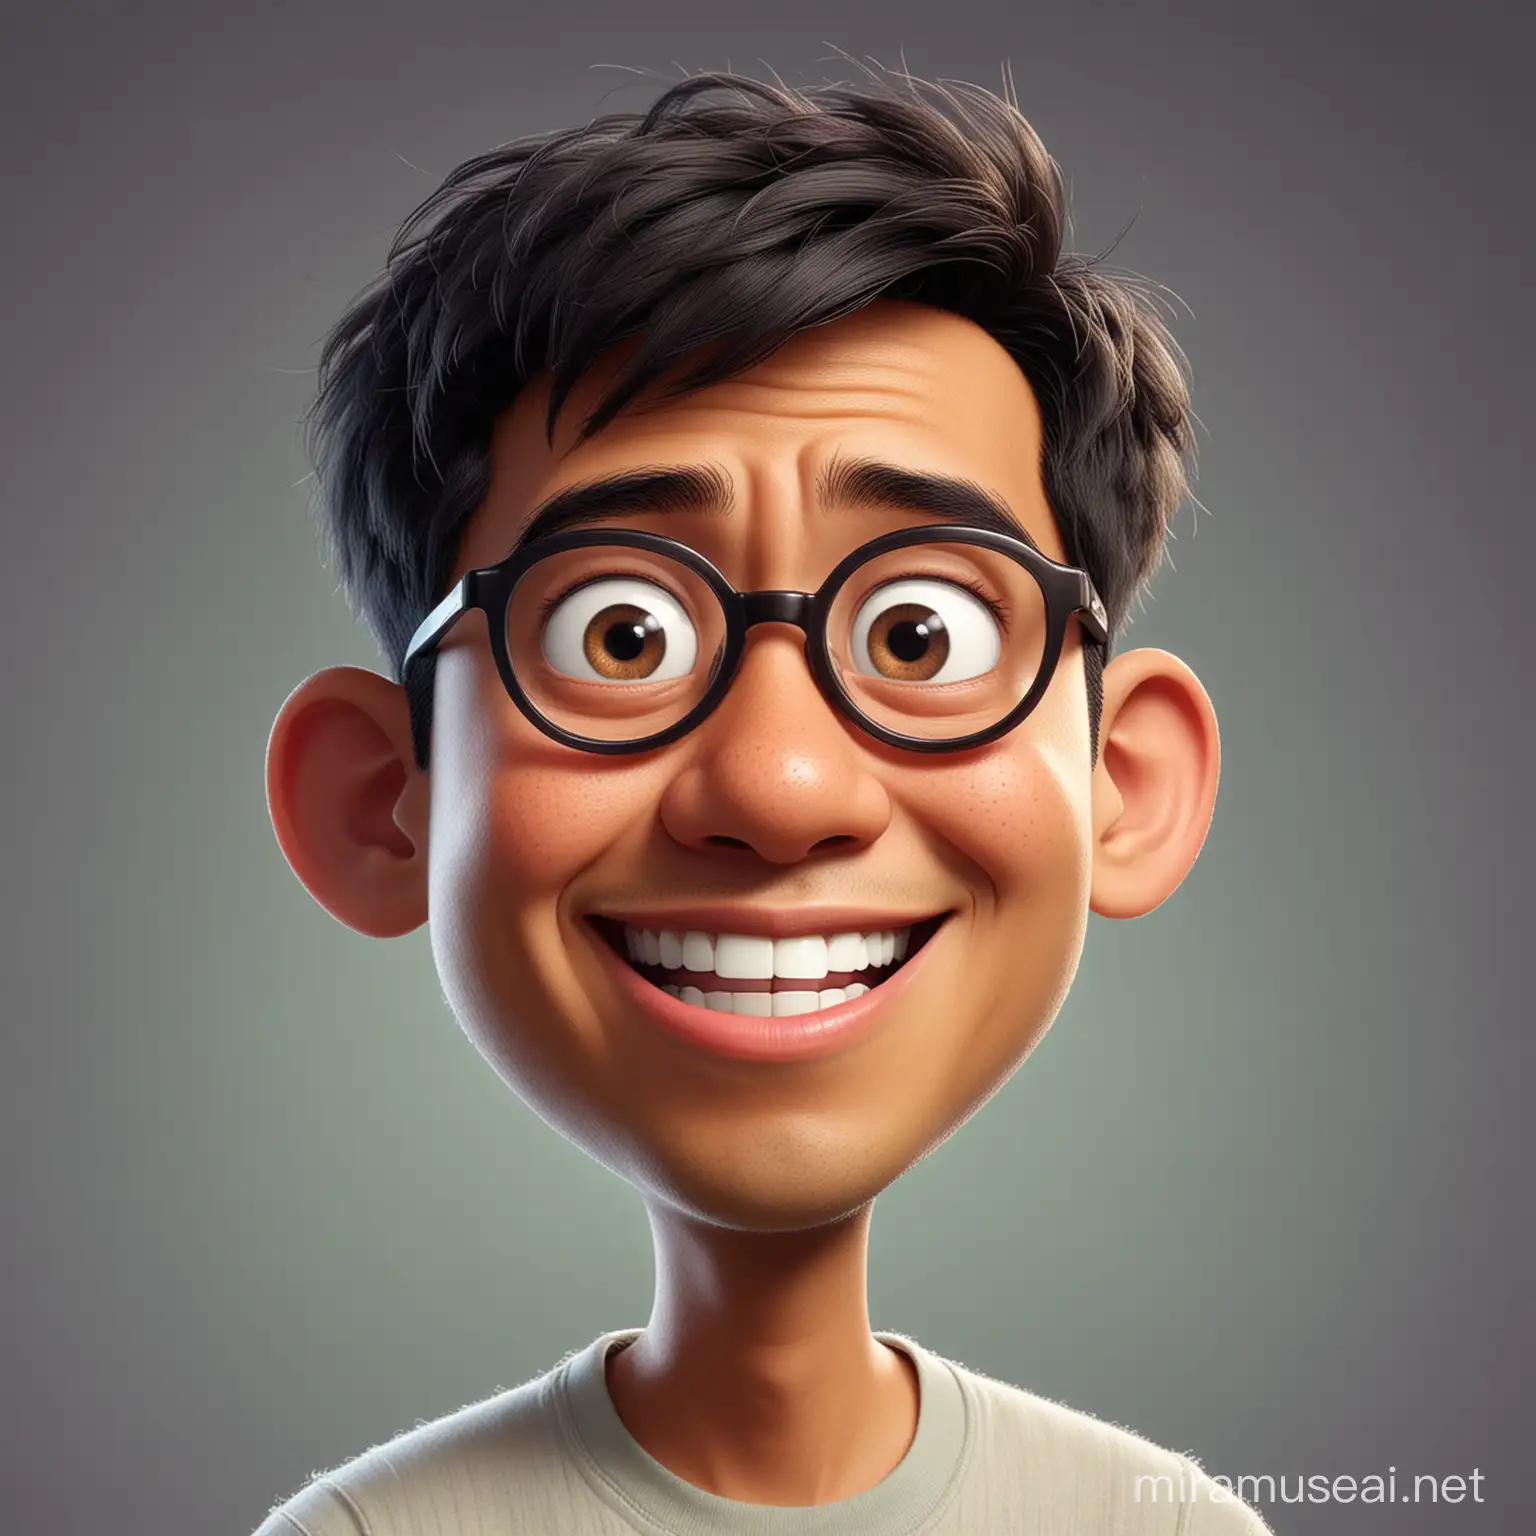 Cheerful Indonesian Man in Cartoon Style with Glasses and Funny Expressions